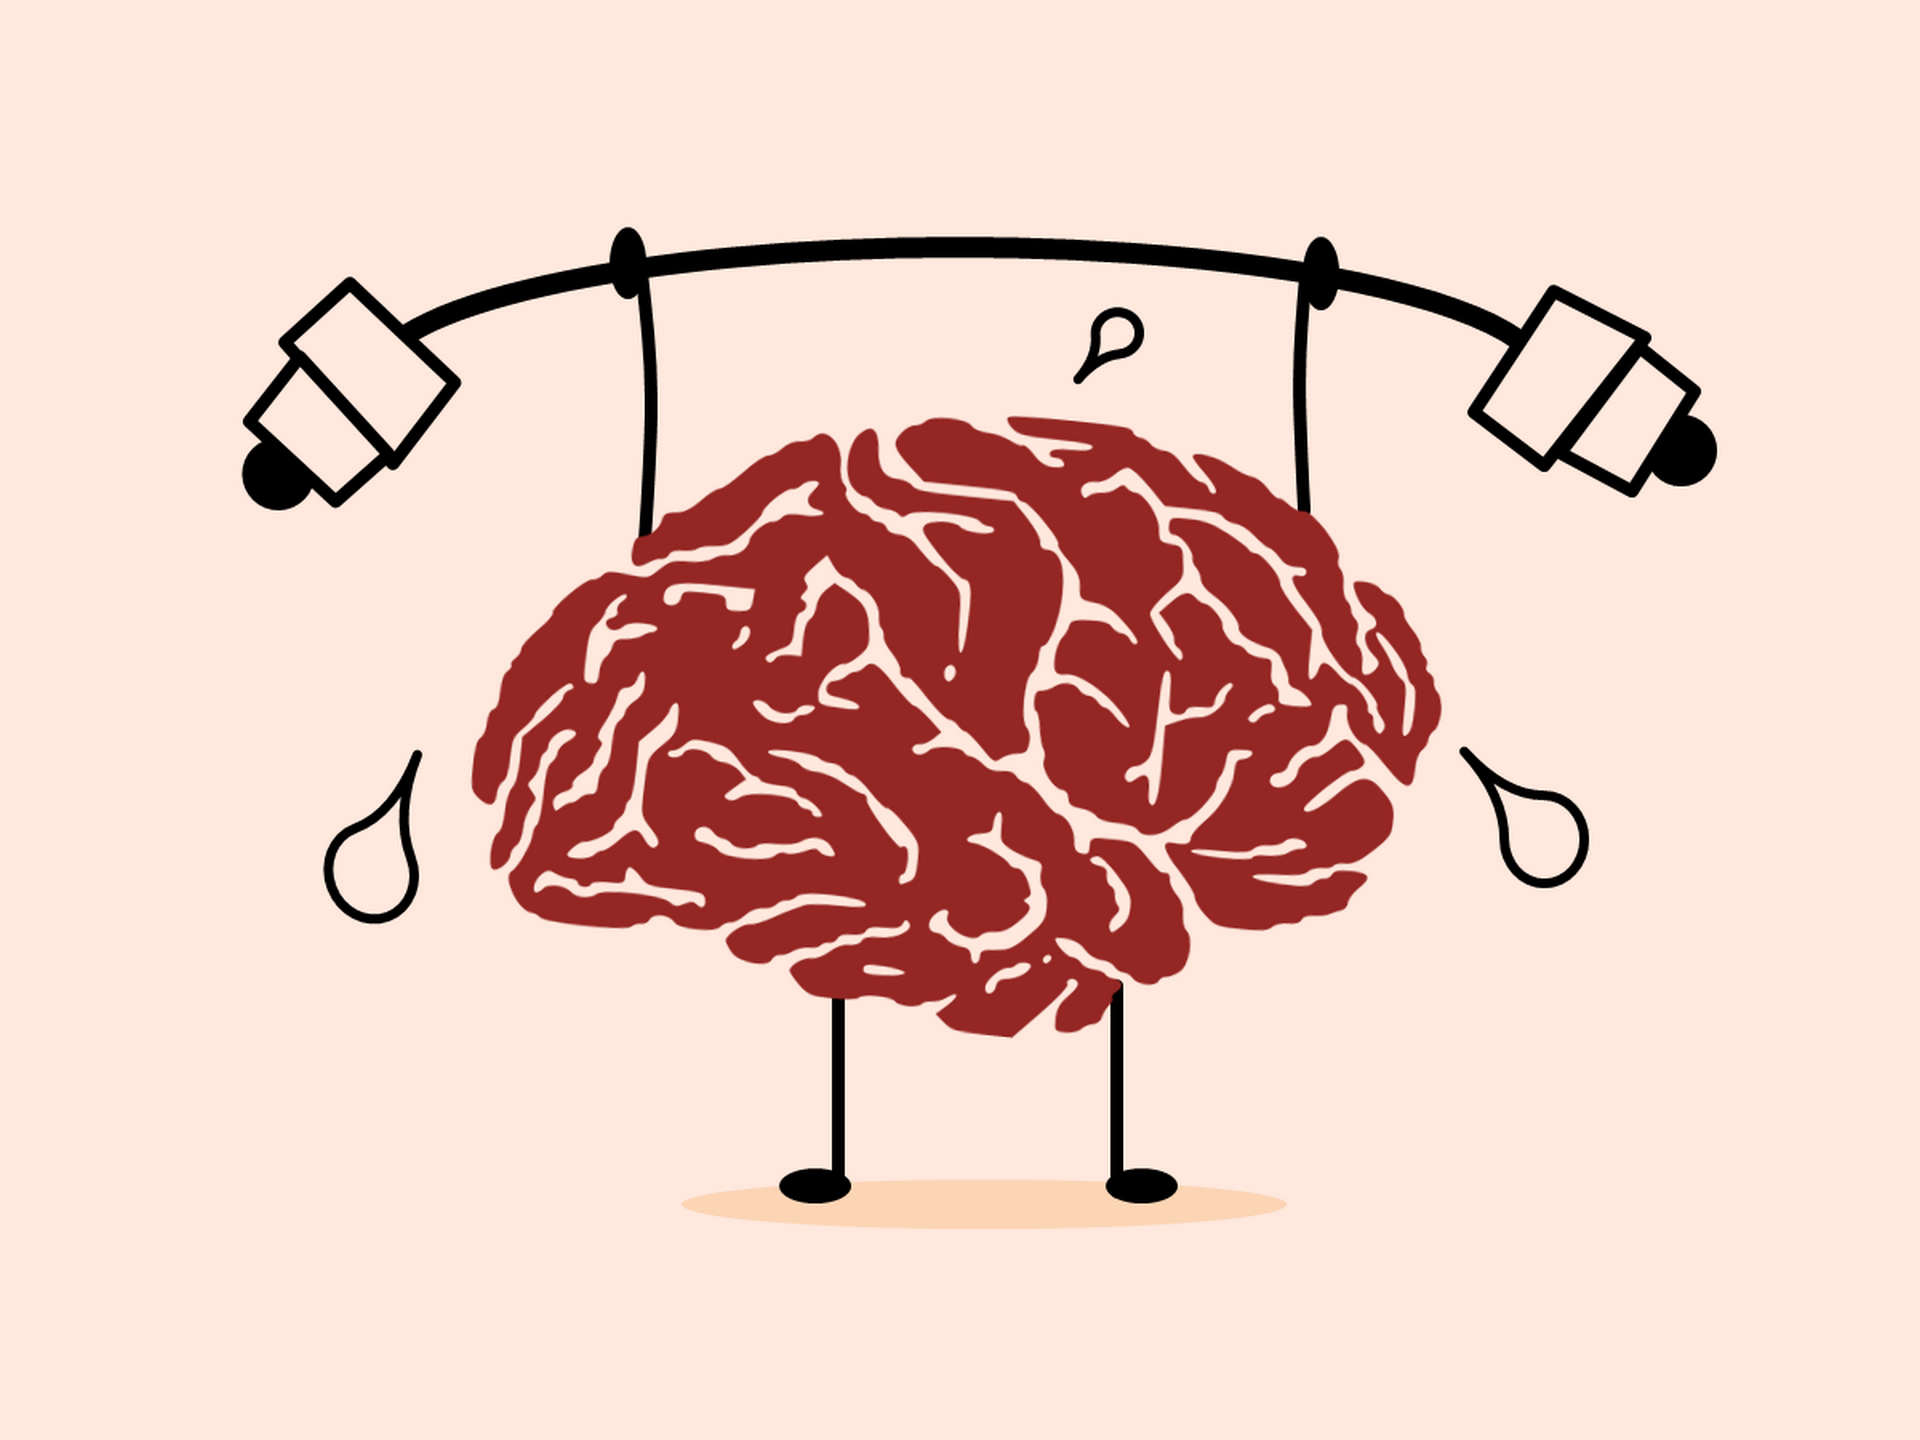 Illustration of a brain lifting weights.